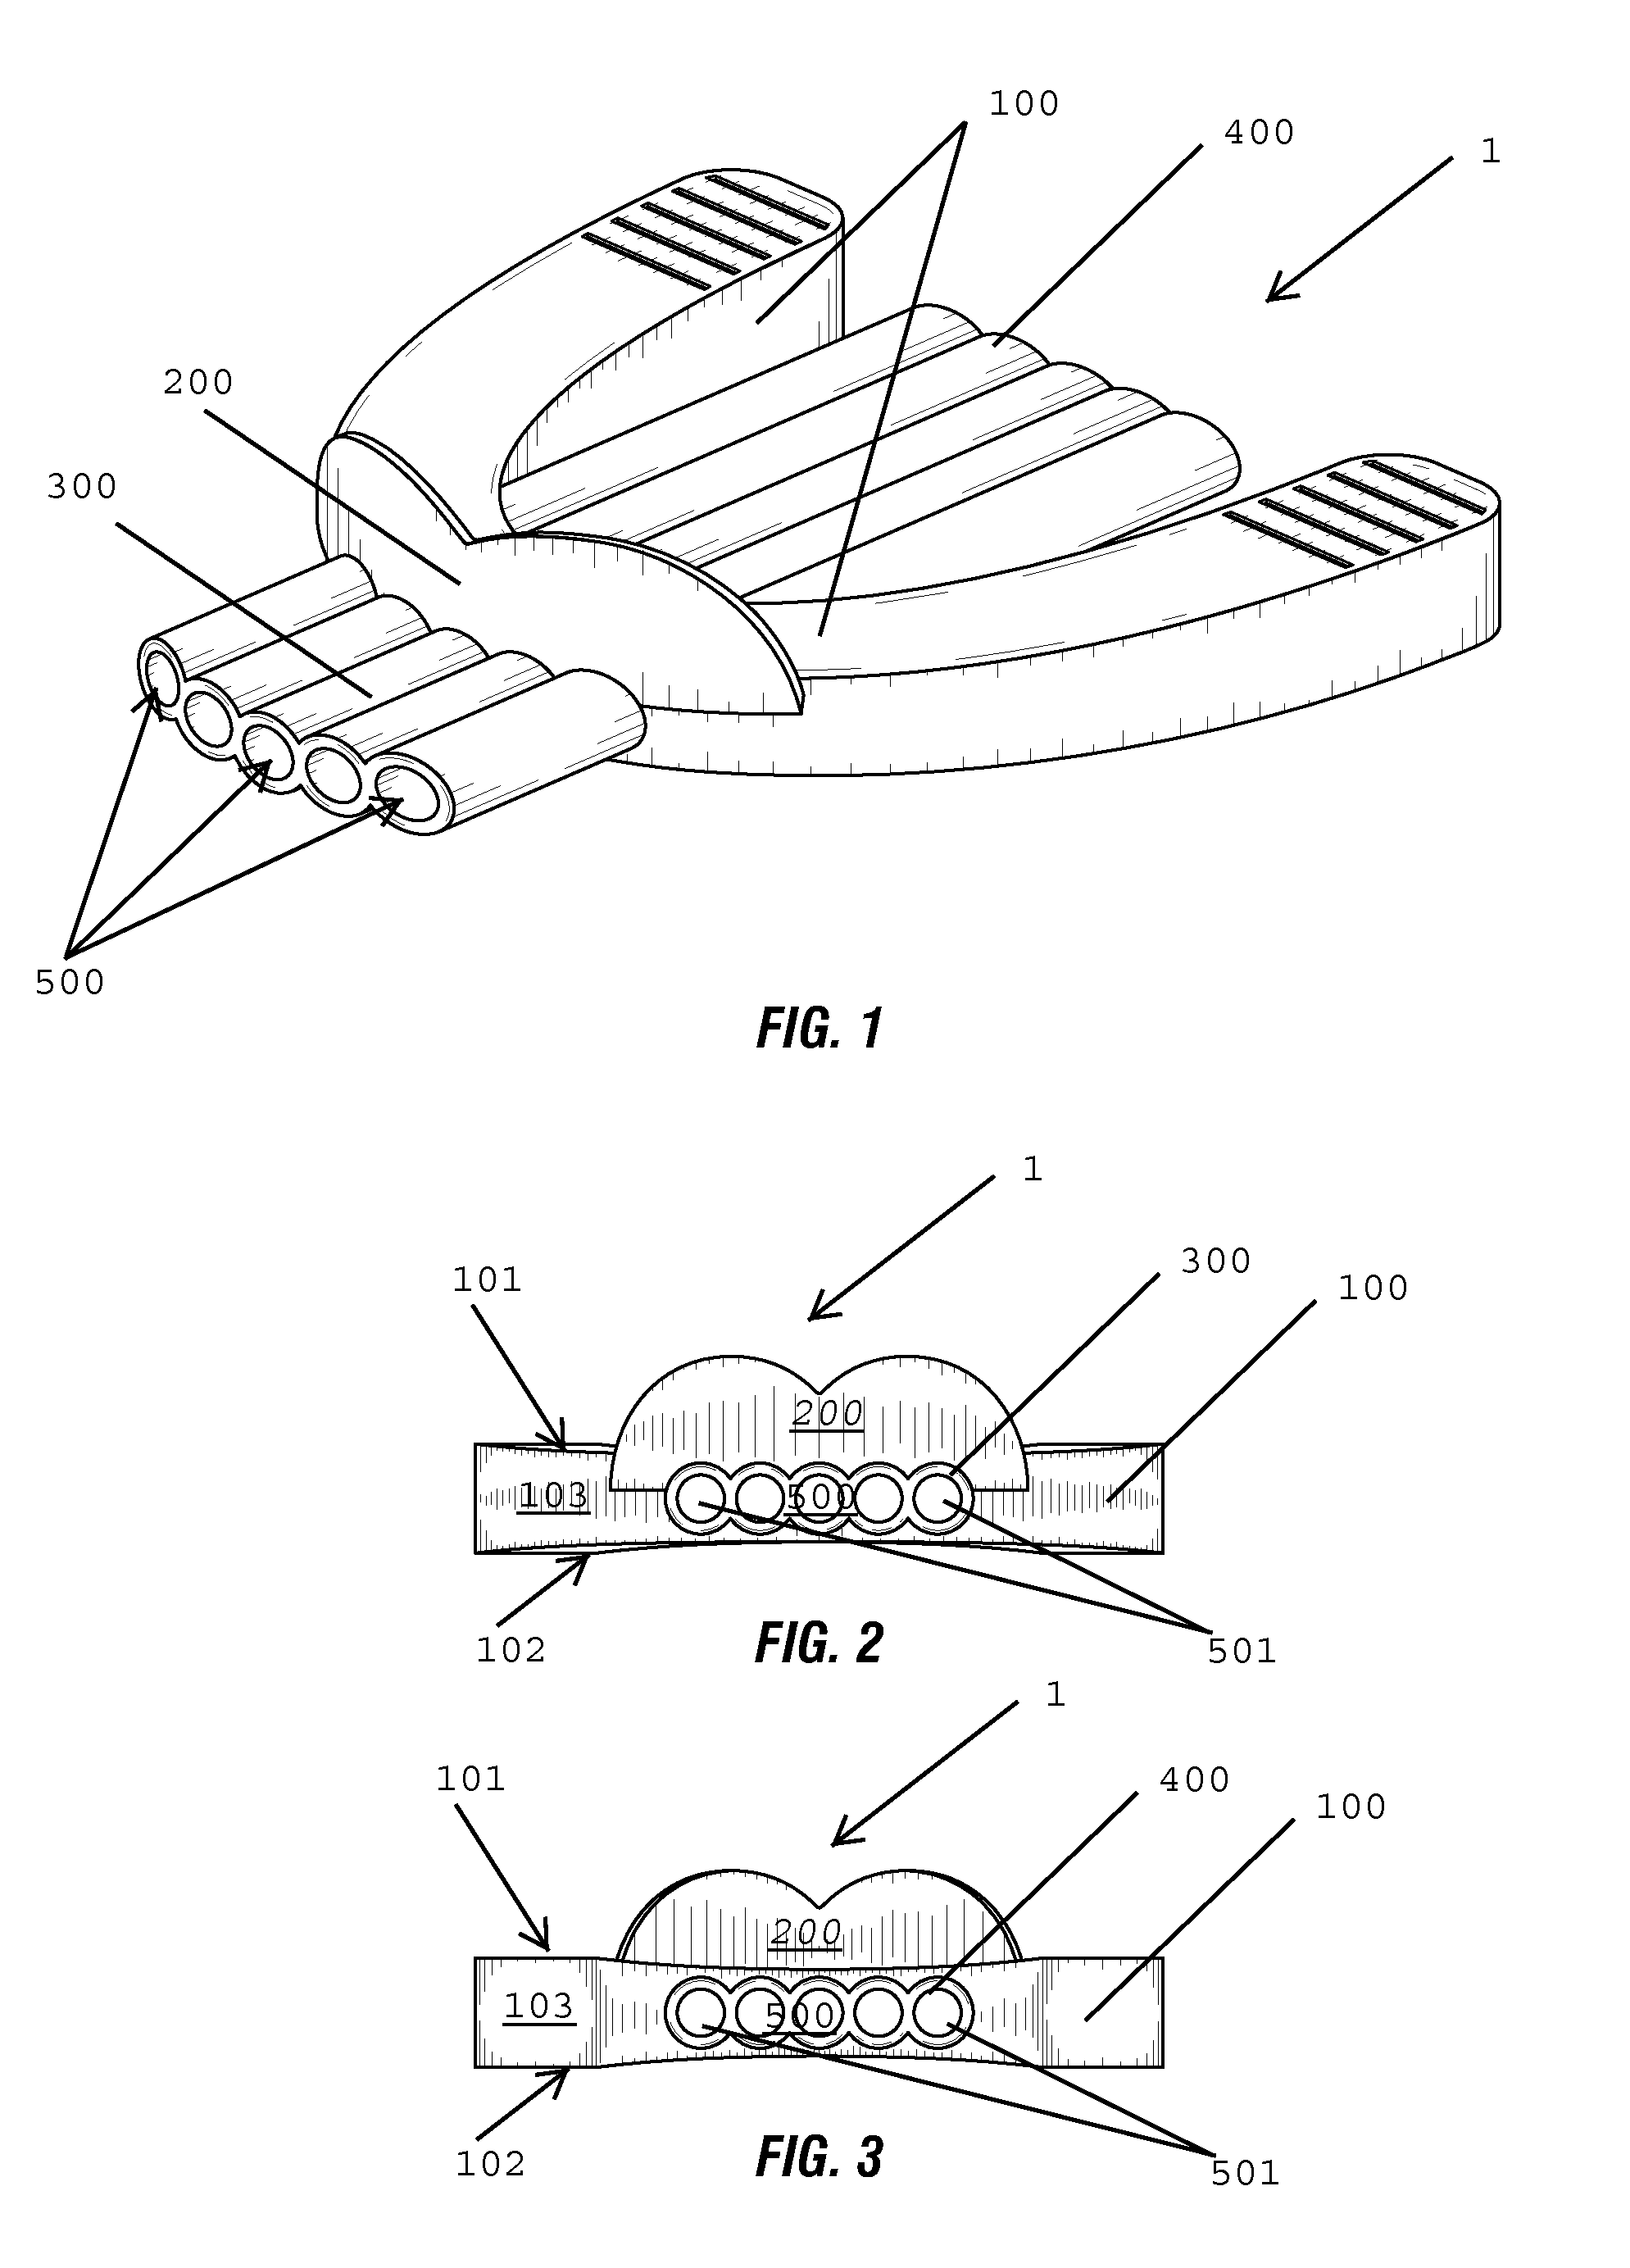 Apparatus for Facilitating Respiration During Nasal Congestion, and Related Methods